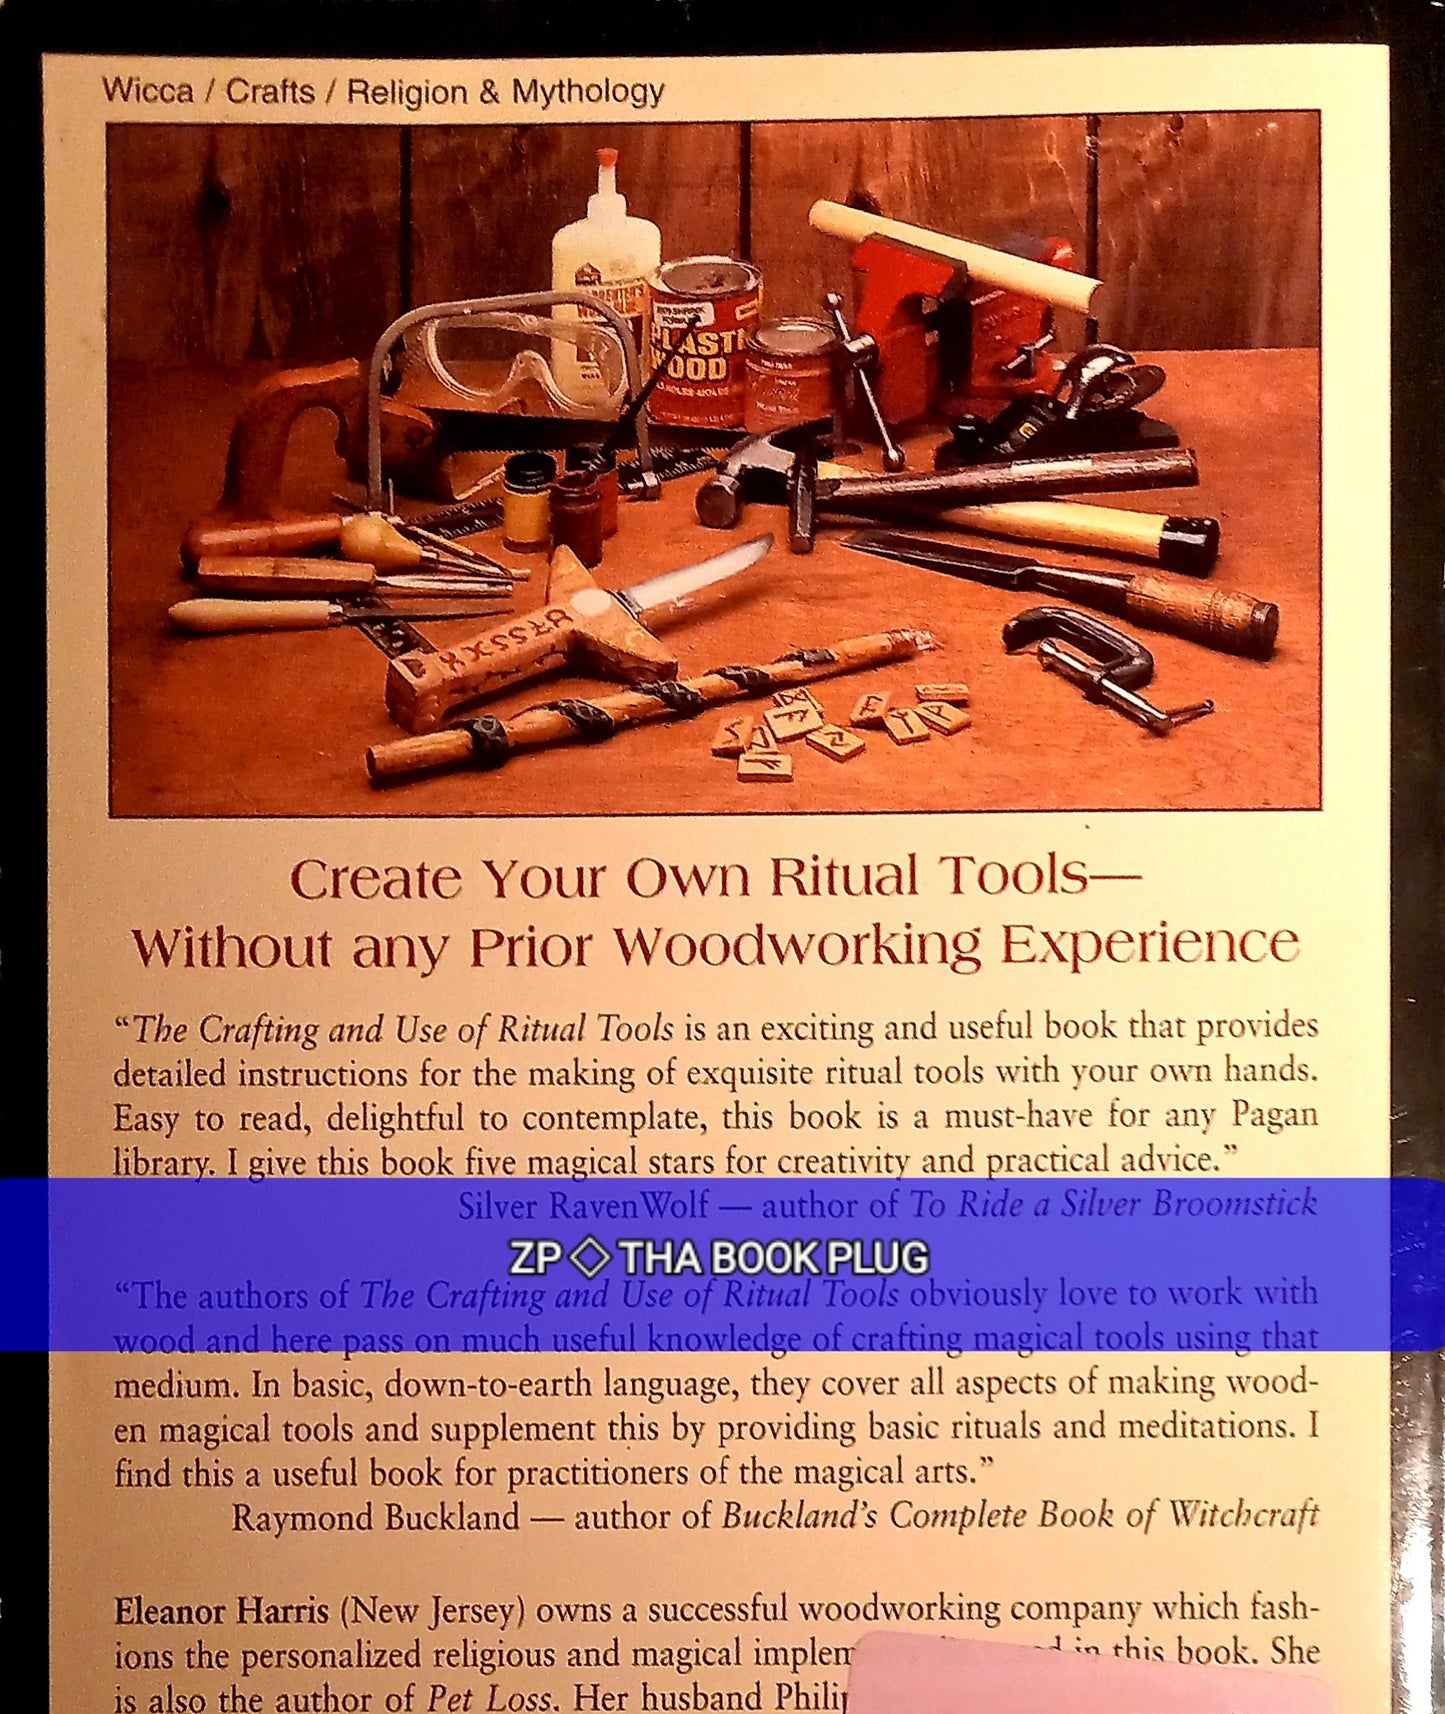 The Crafting & Use of Ritual Tools